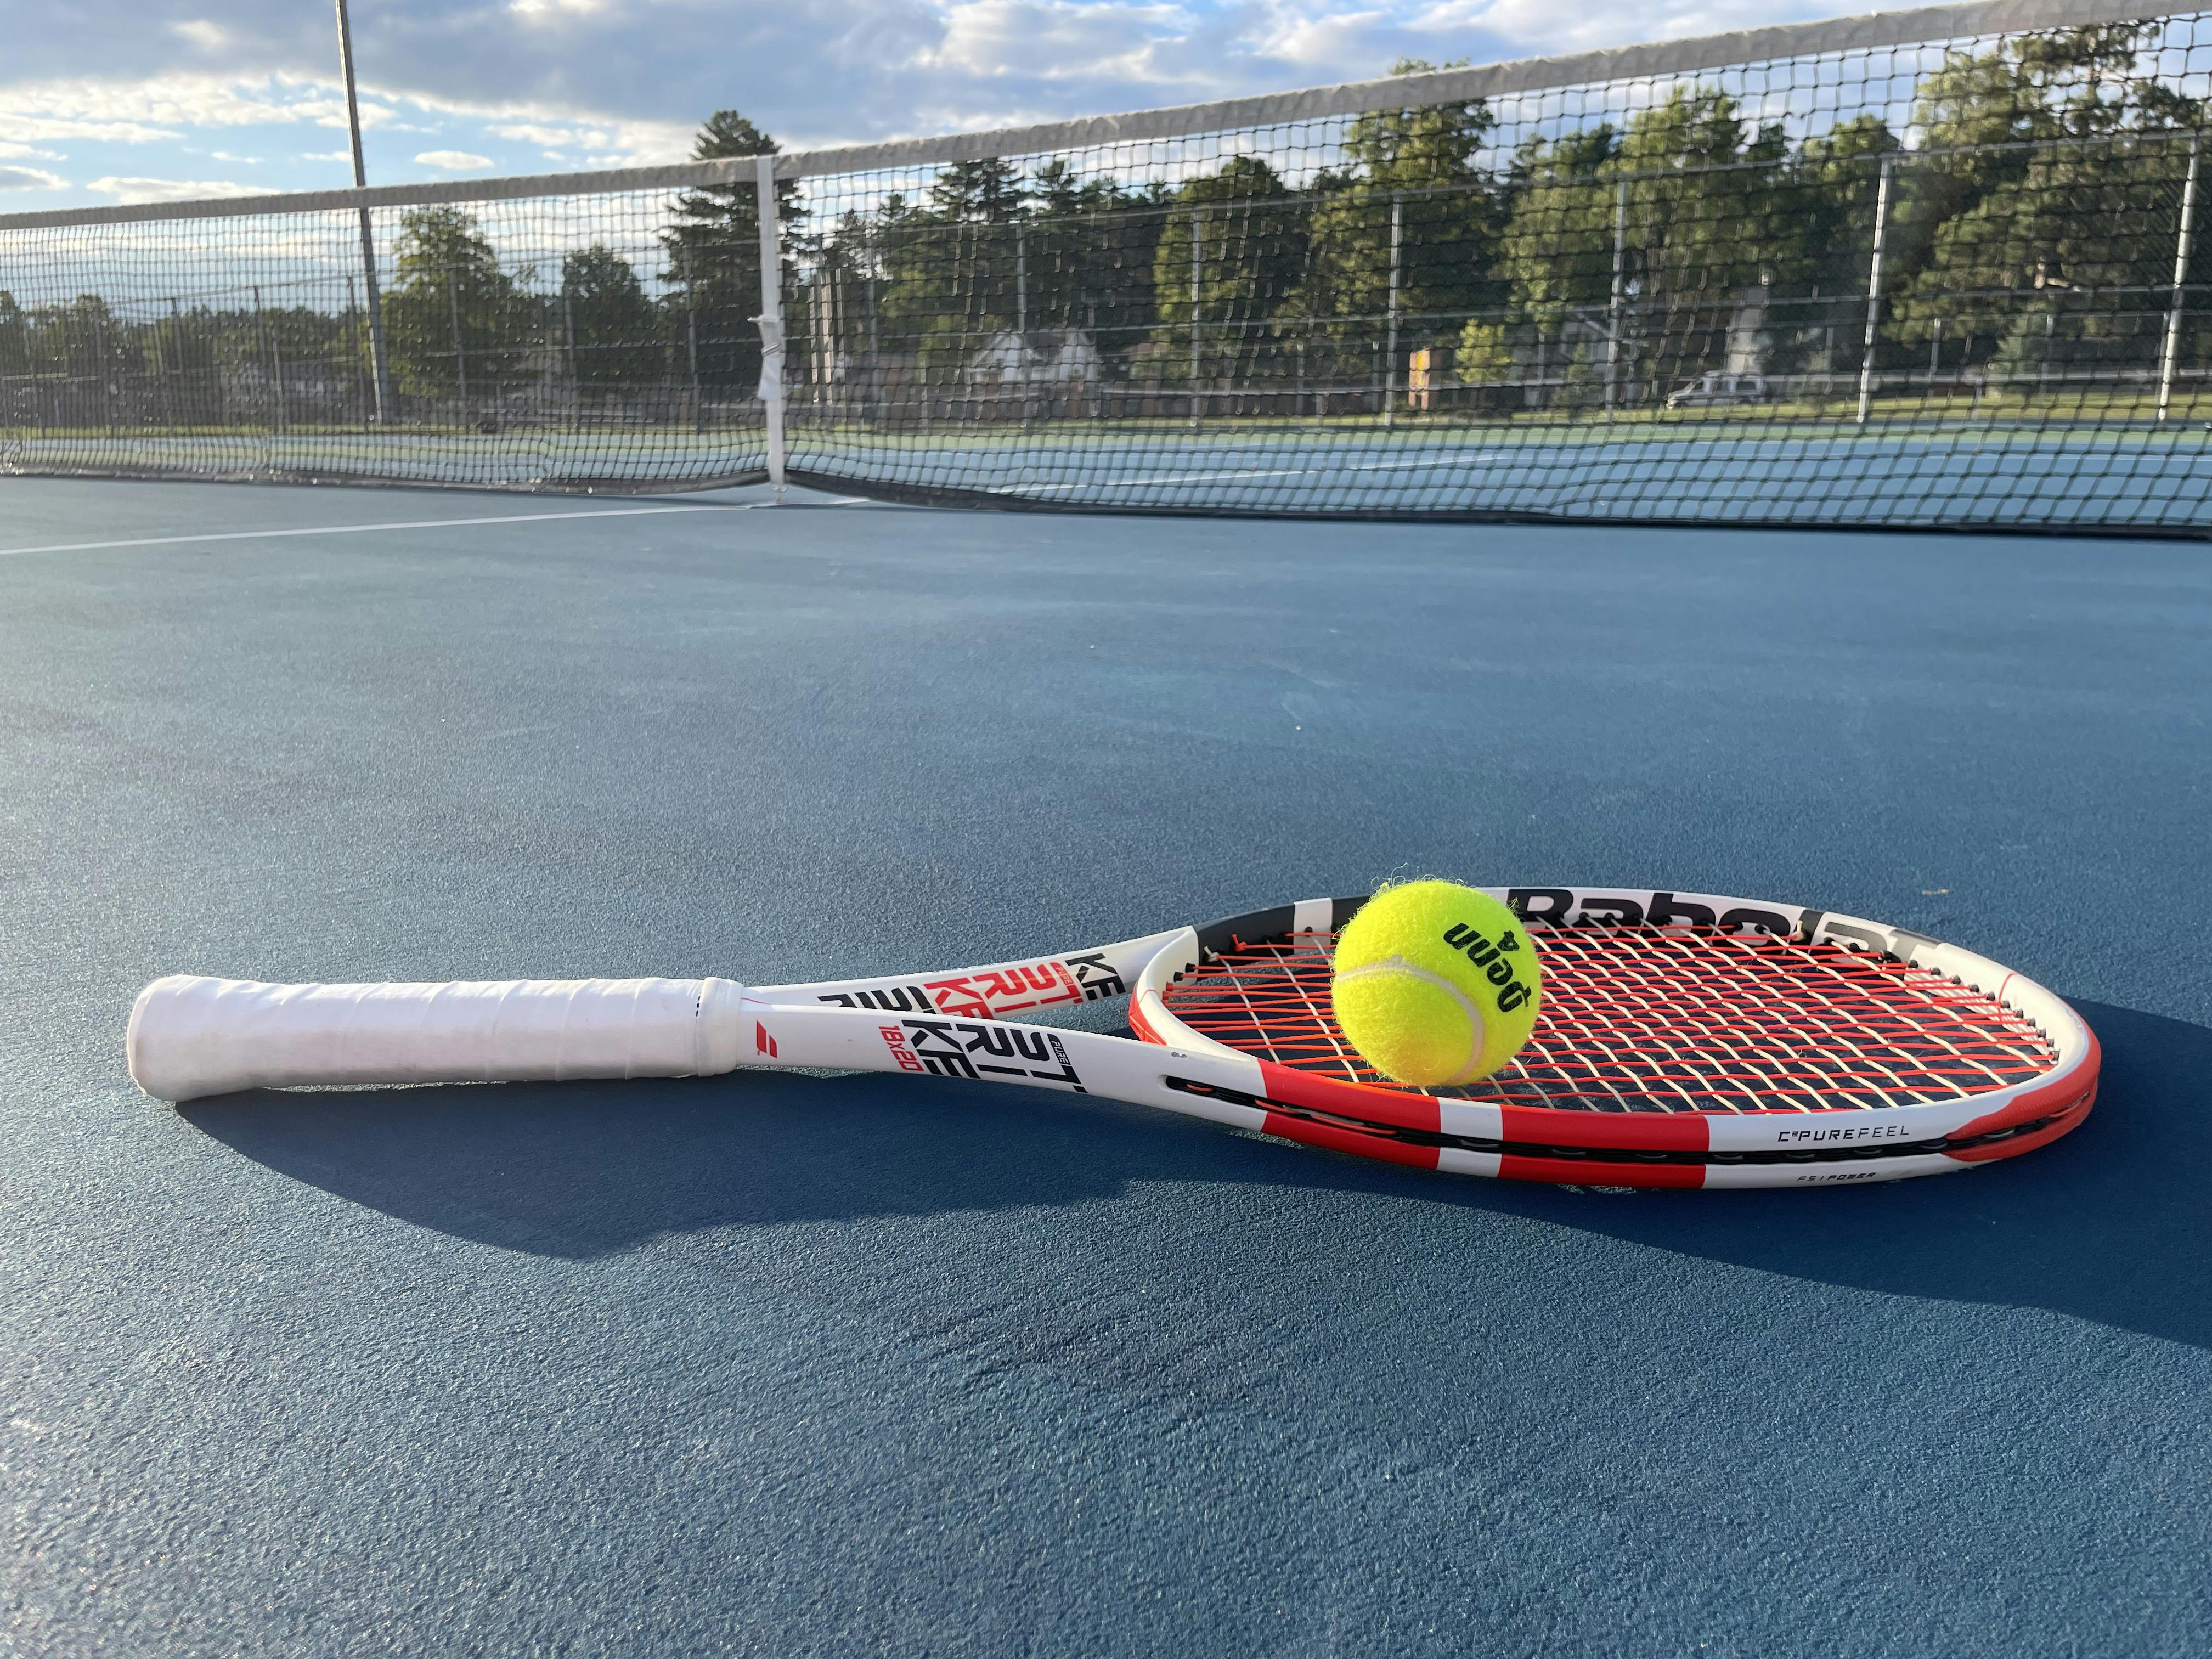 The Babolat Pure Strike 18x20 Racquet lying on the tennis court with a tennis ball.